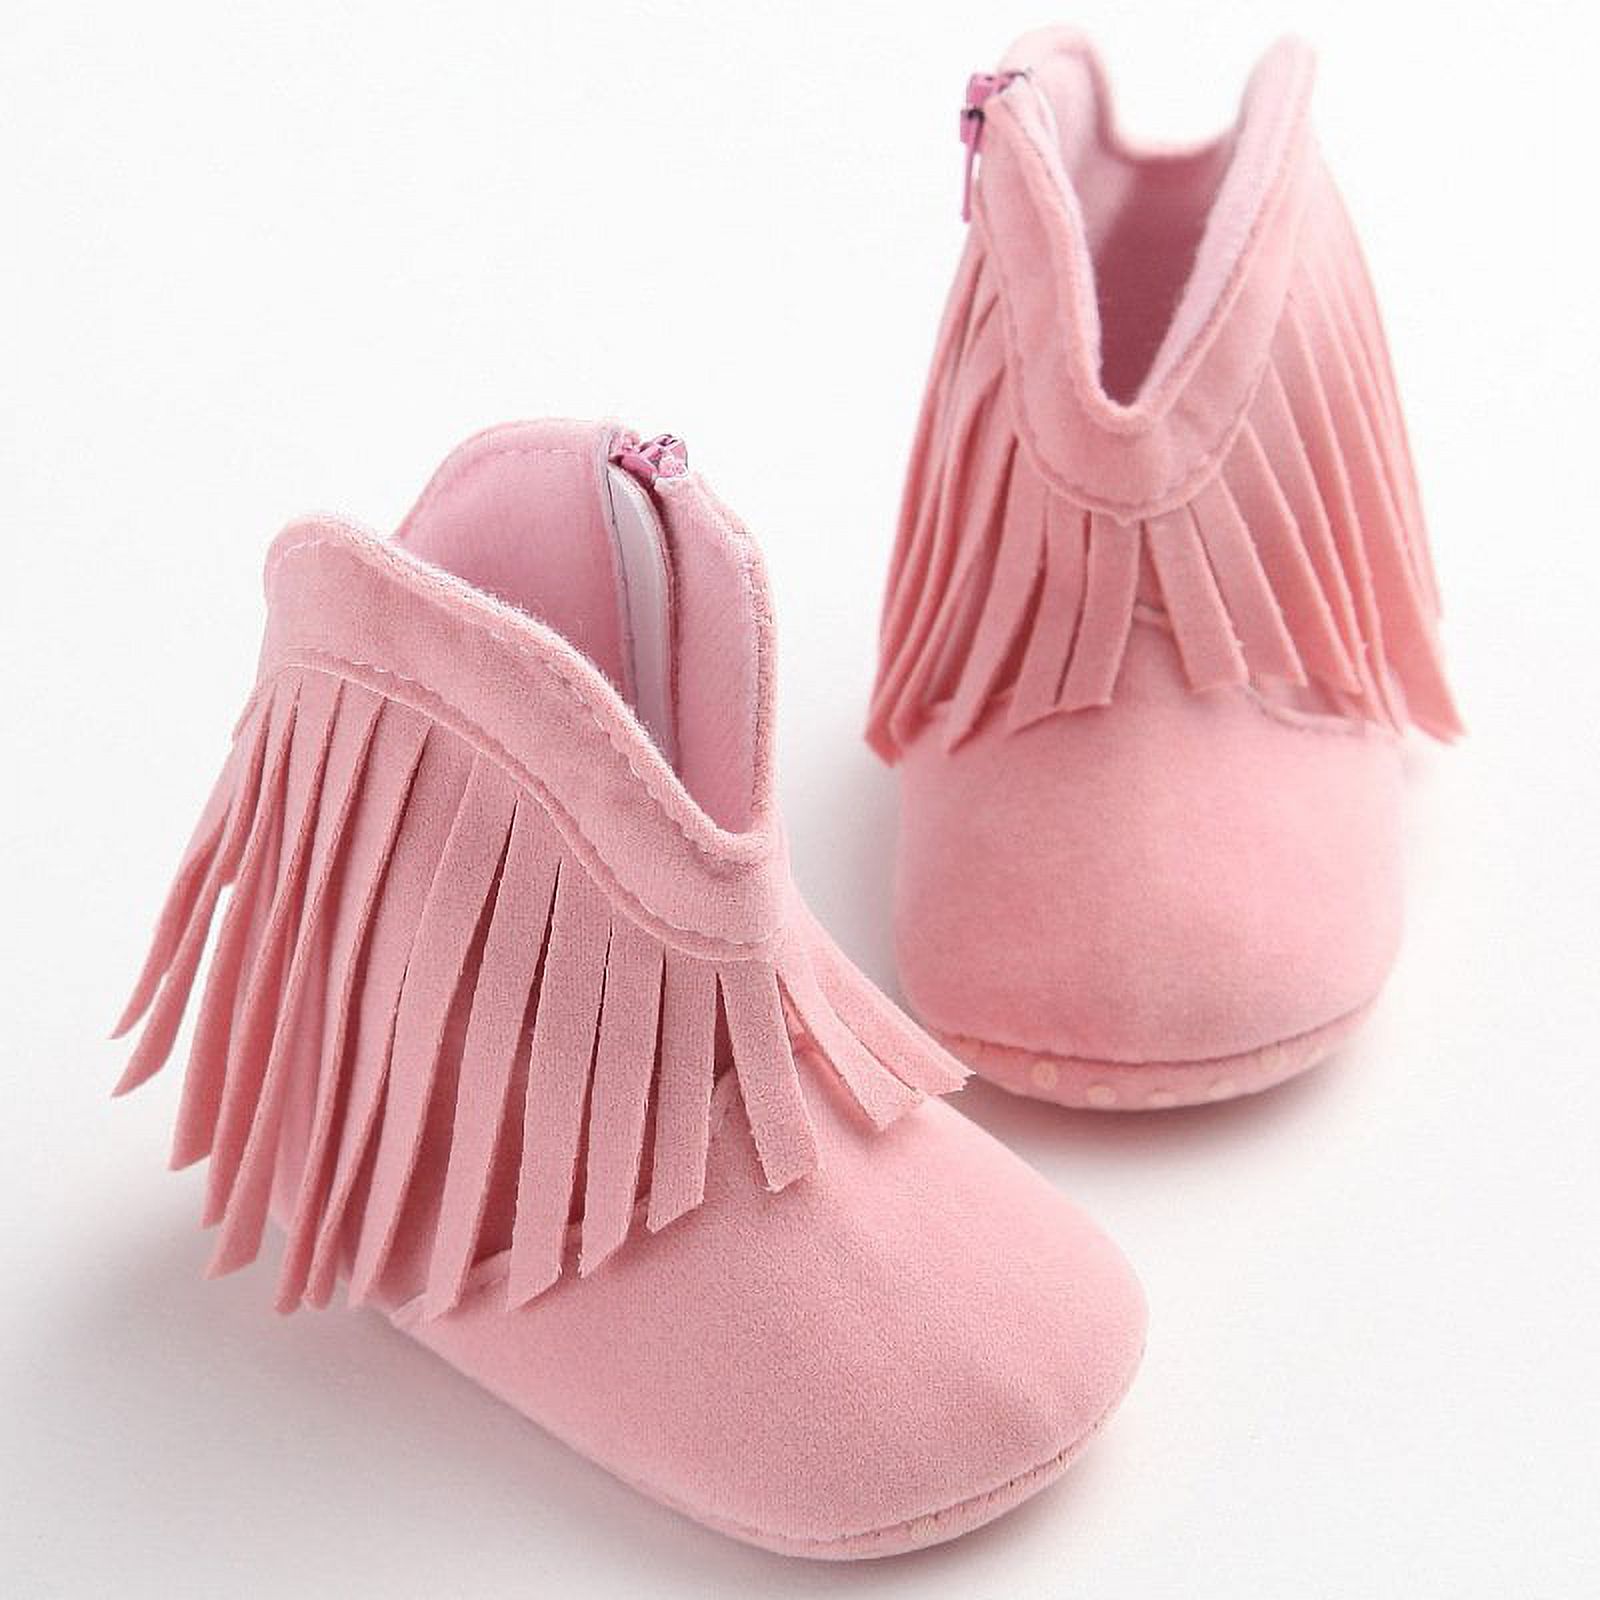 Newborn Toddler Tassel Boots Baby Infant Boy Girl Soft Soled Winter Shoes - image 3 of 6